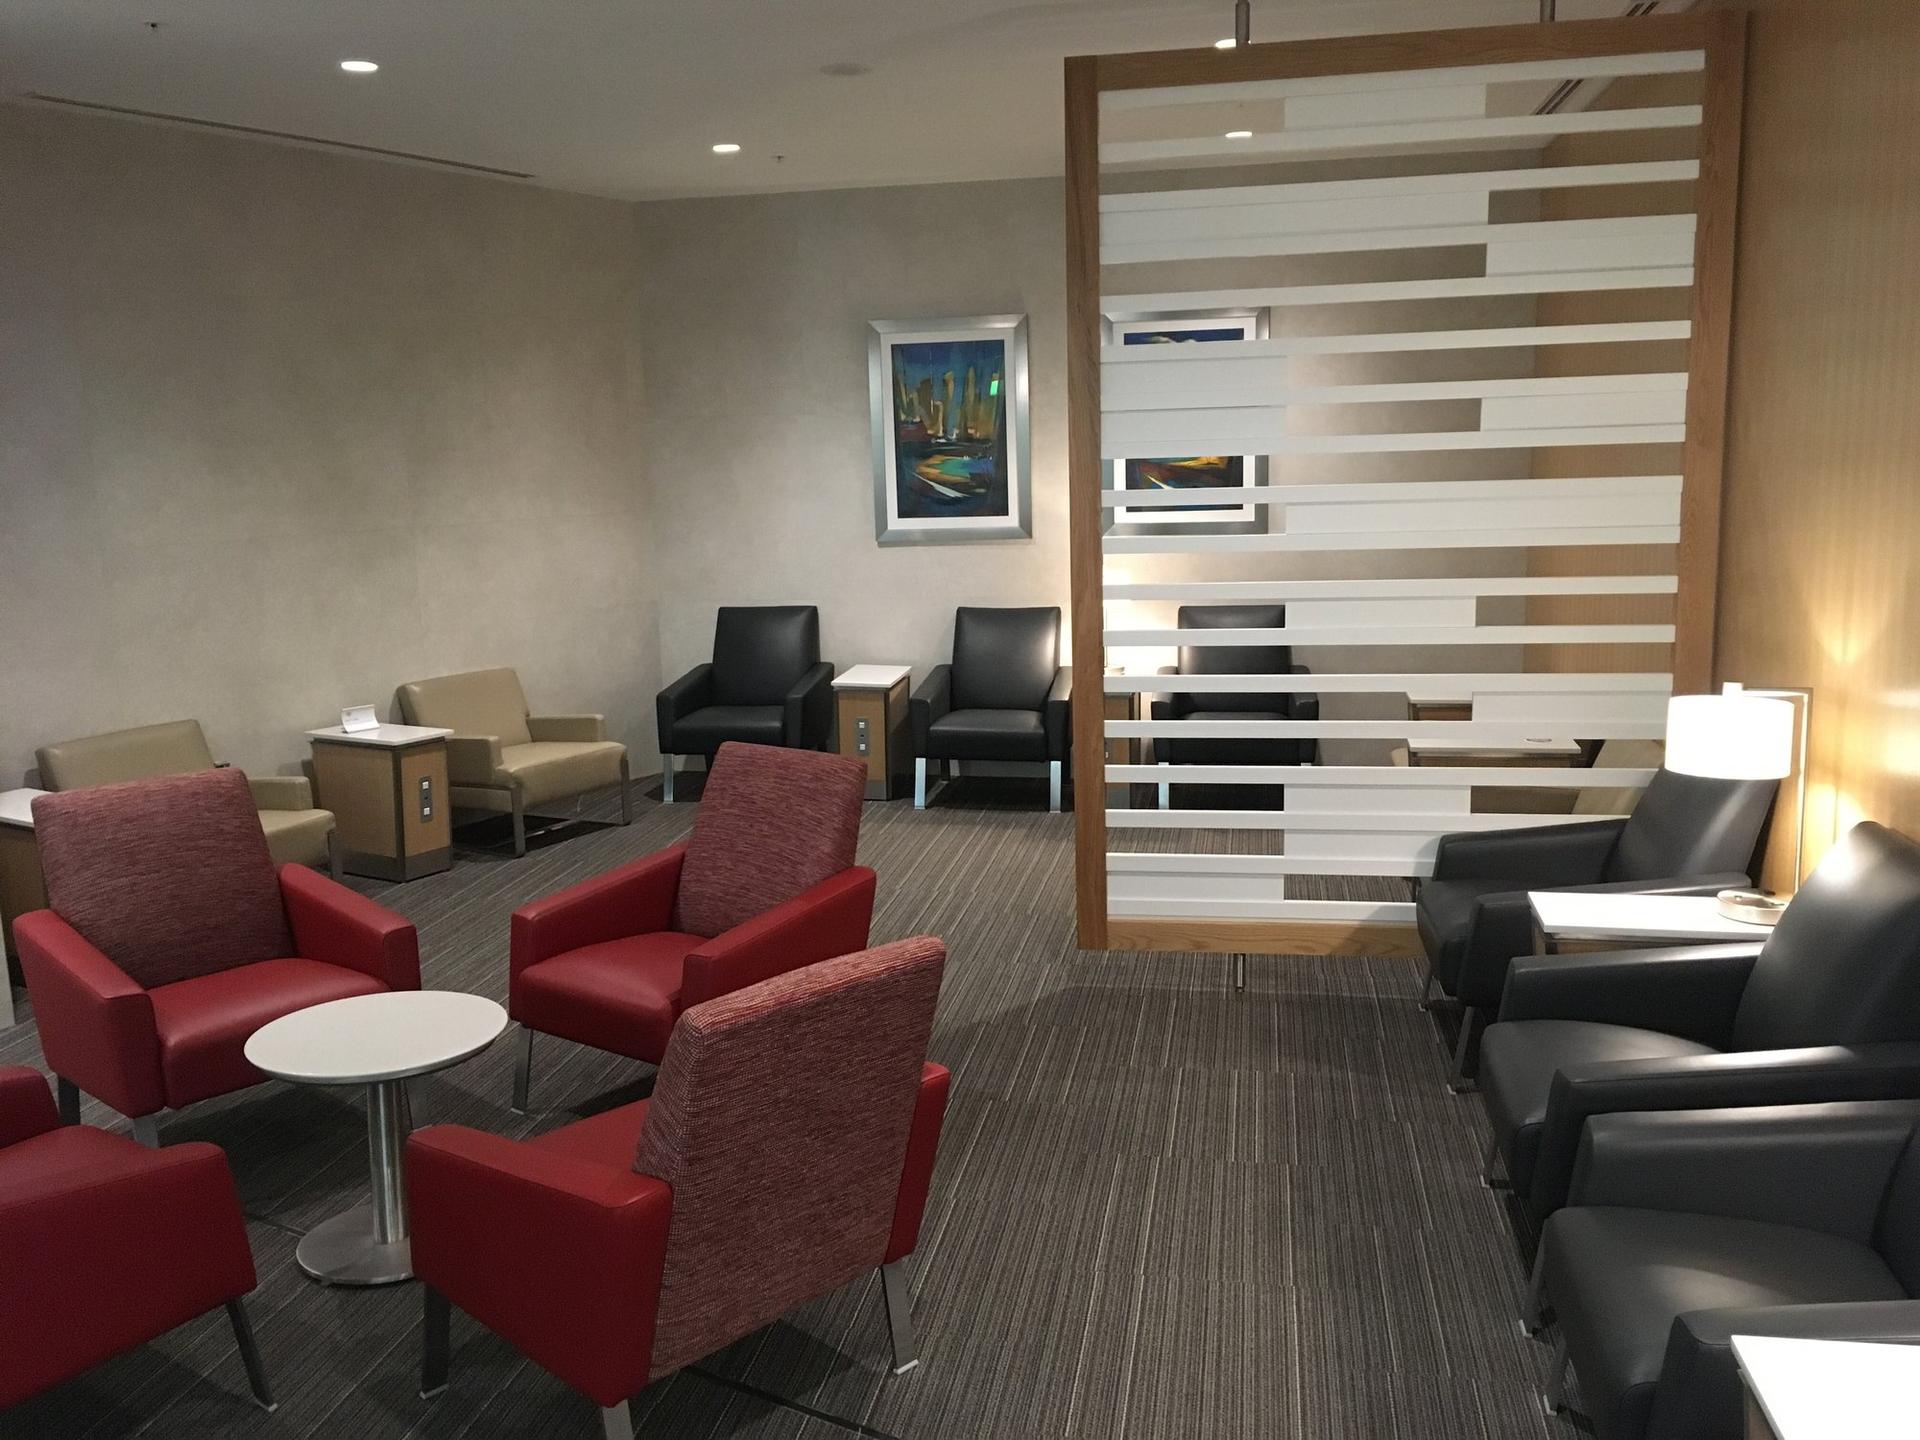 American Airlines Flagship Lounge image 41 of 65